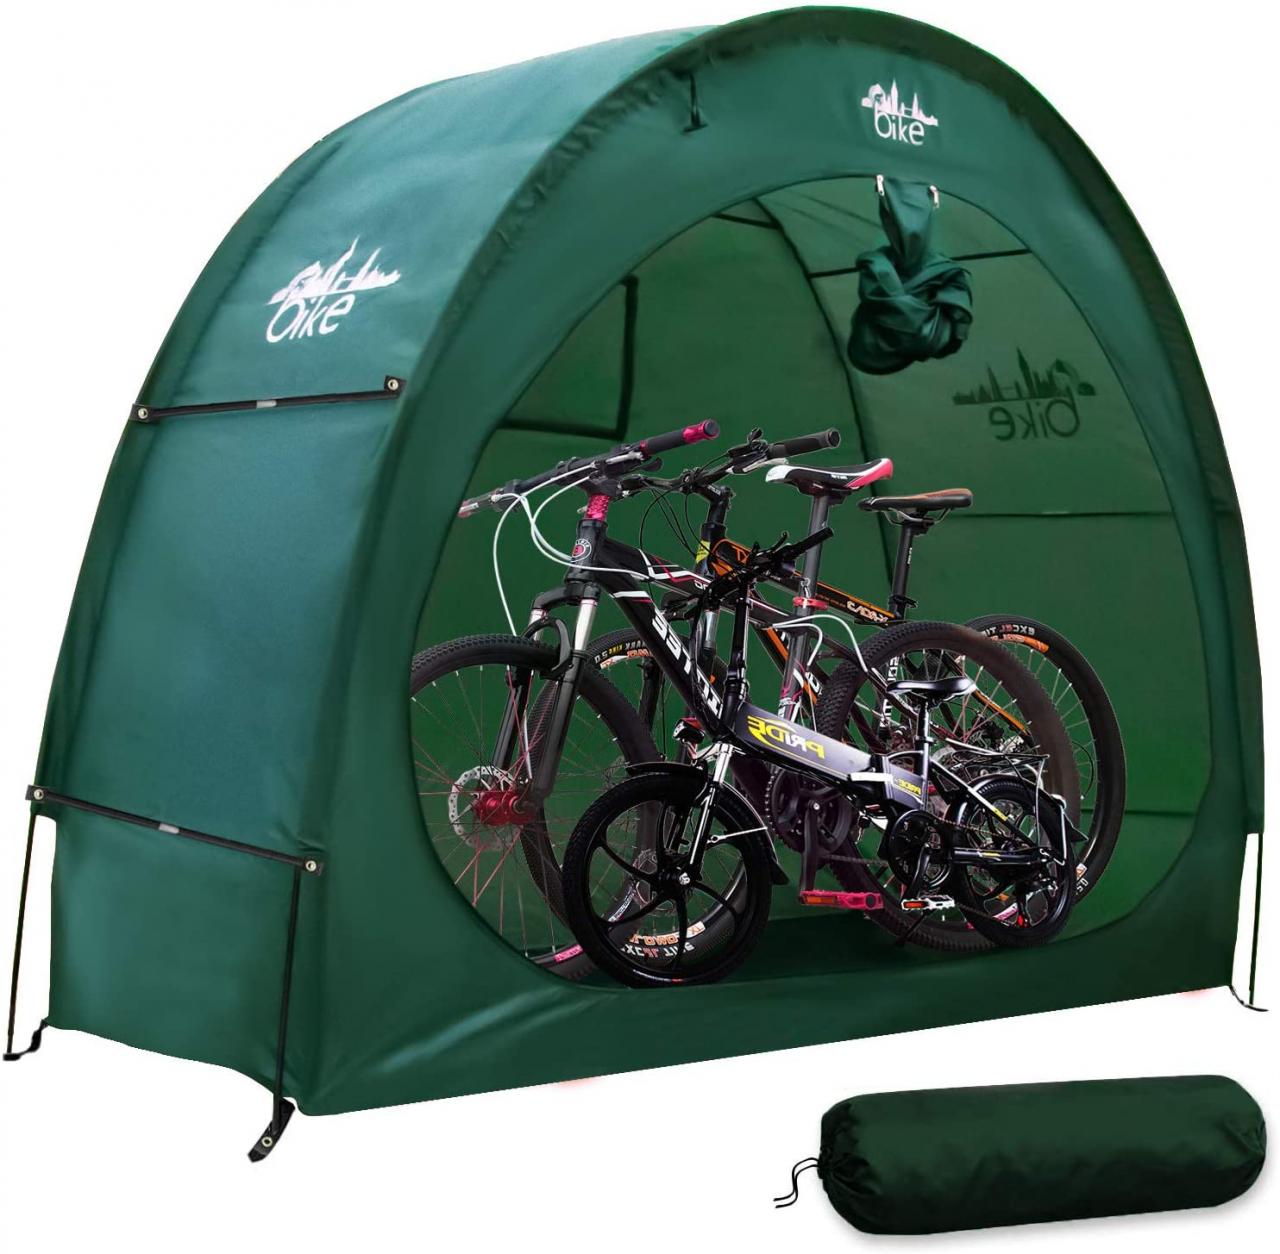 Top 8 Best Outdoor Bicycle Storage Shed In 2021 Reviews & Buying Guide